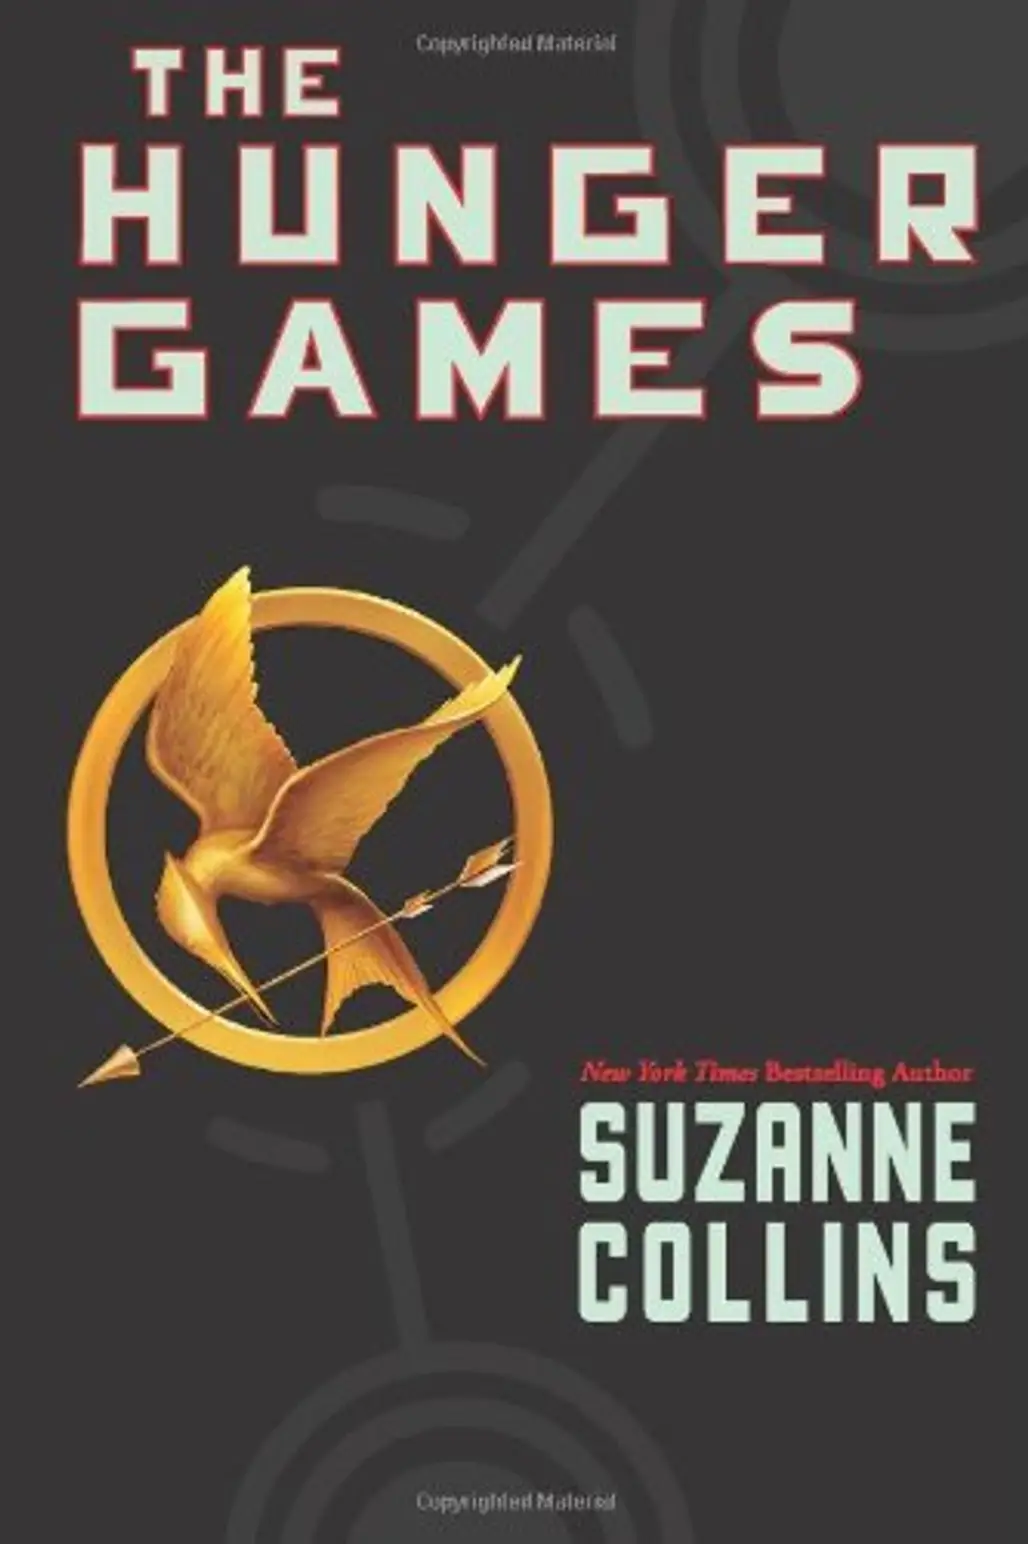 The Hunger Games Series by Suzanne Collins